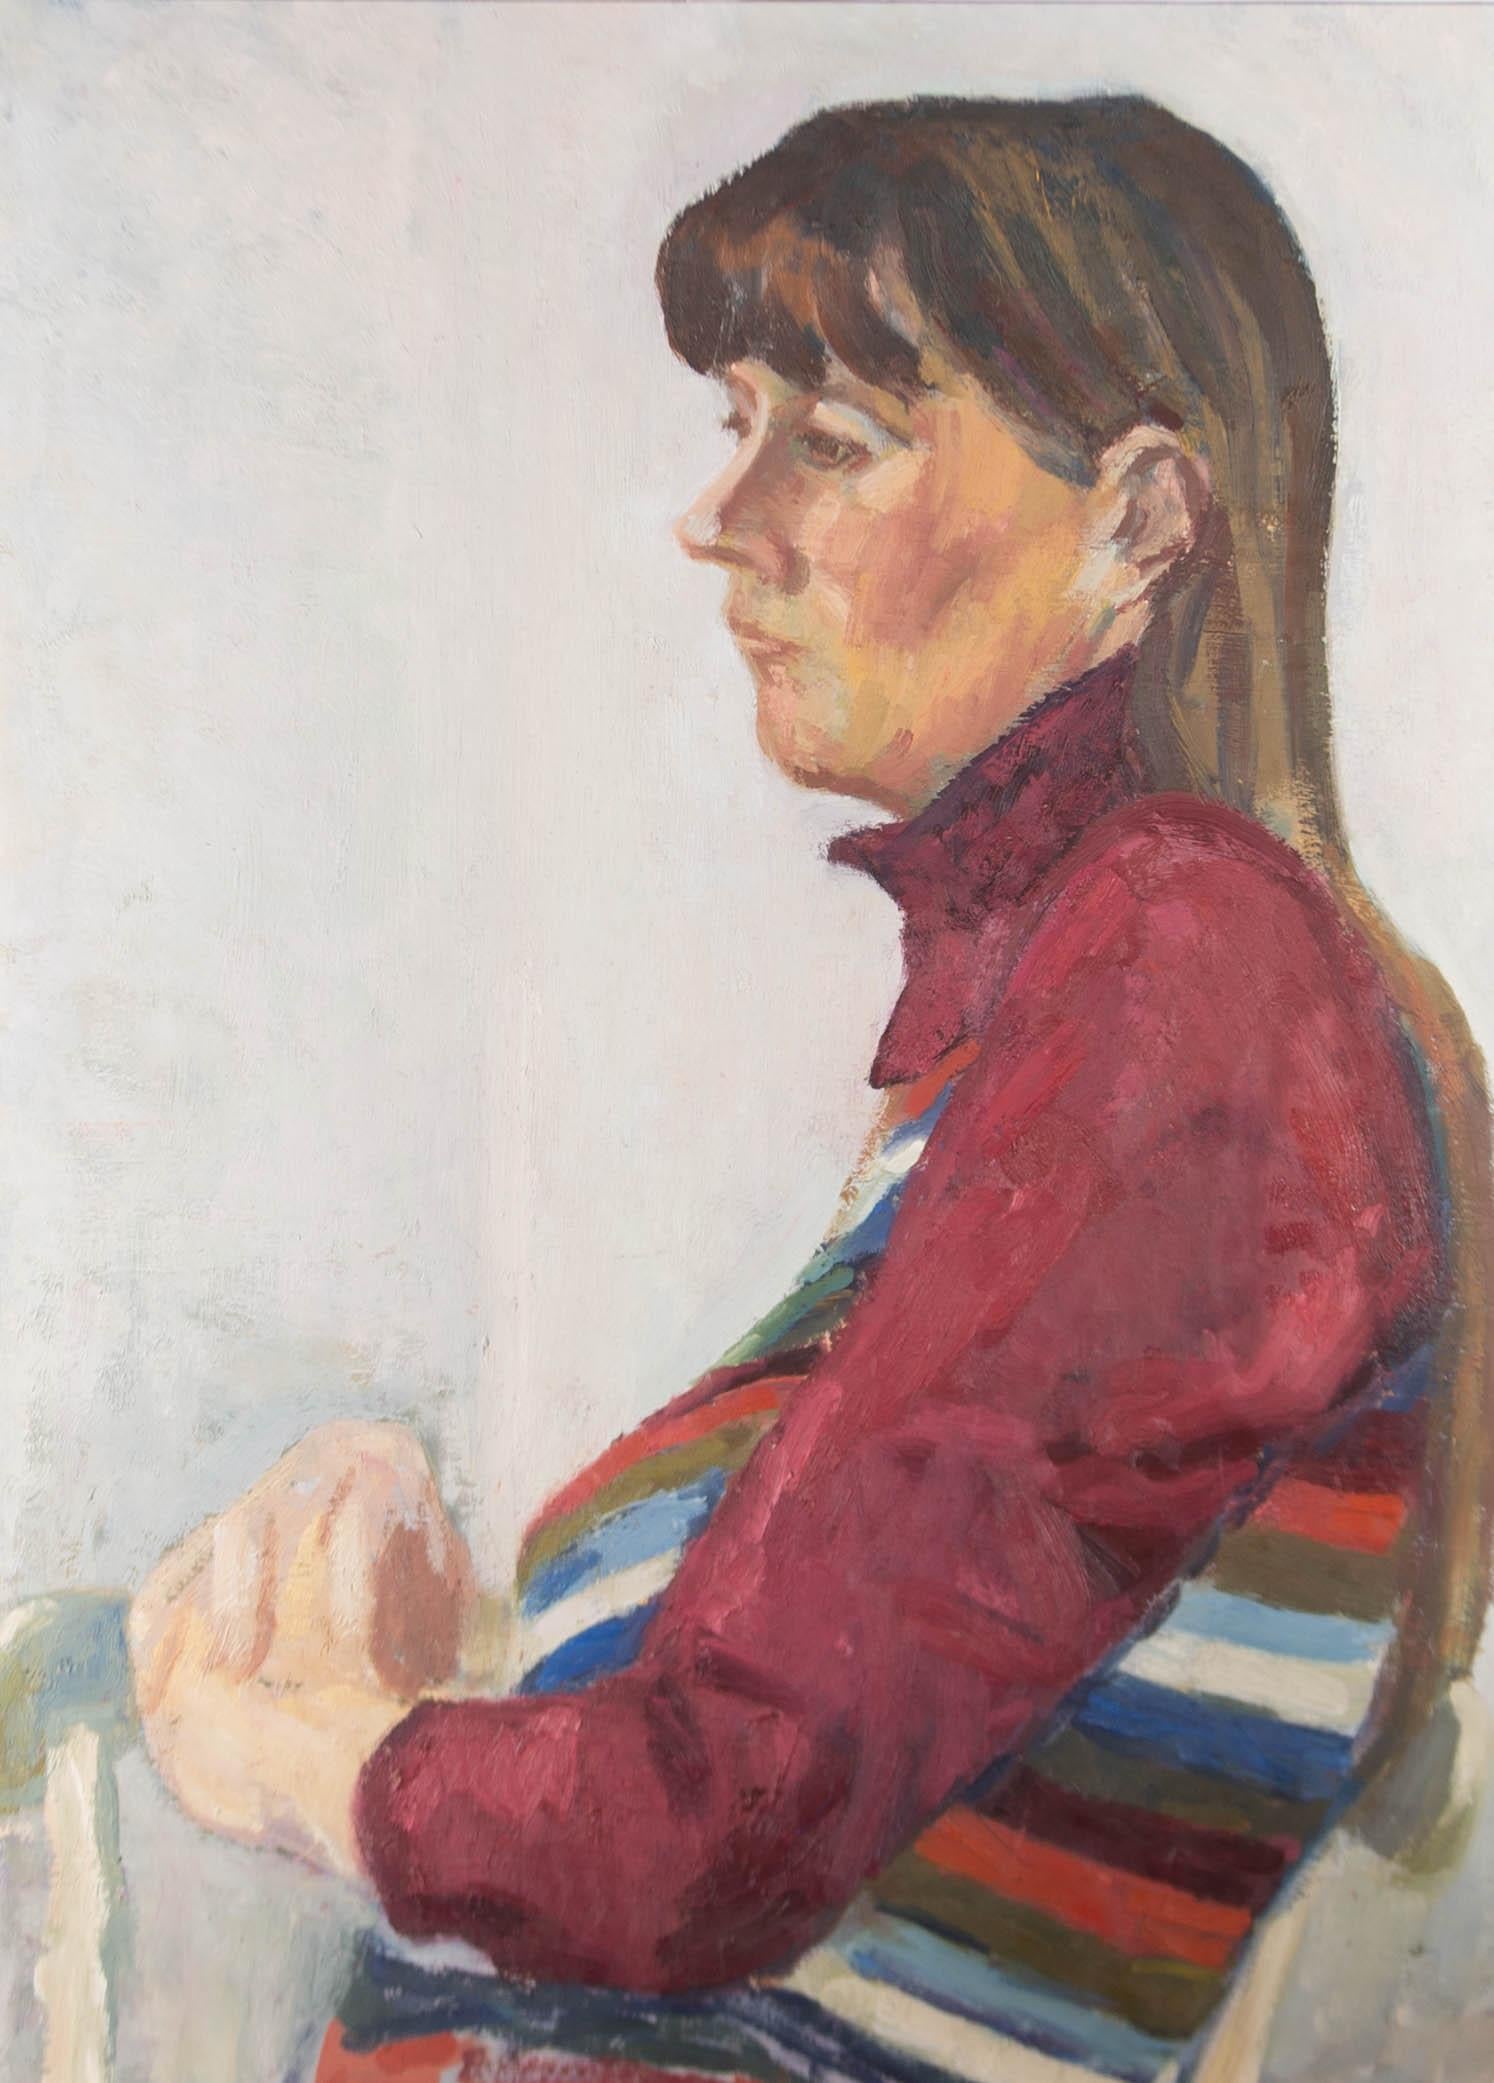 Impastoed oils provide gestural subtleties to this muted portrait of a woman lost in contemplation. The overall artwork provides a subdued, quiet atmosphere. Unsigned.
On wove.